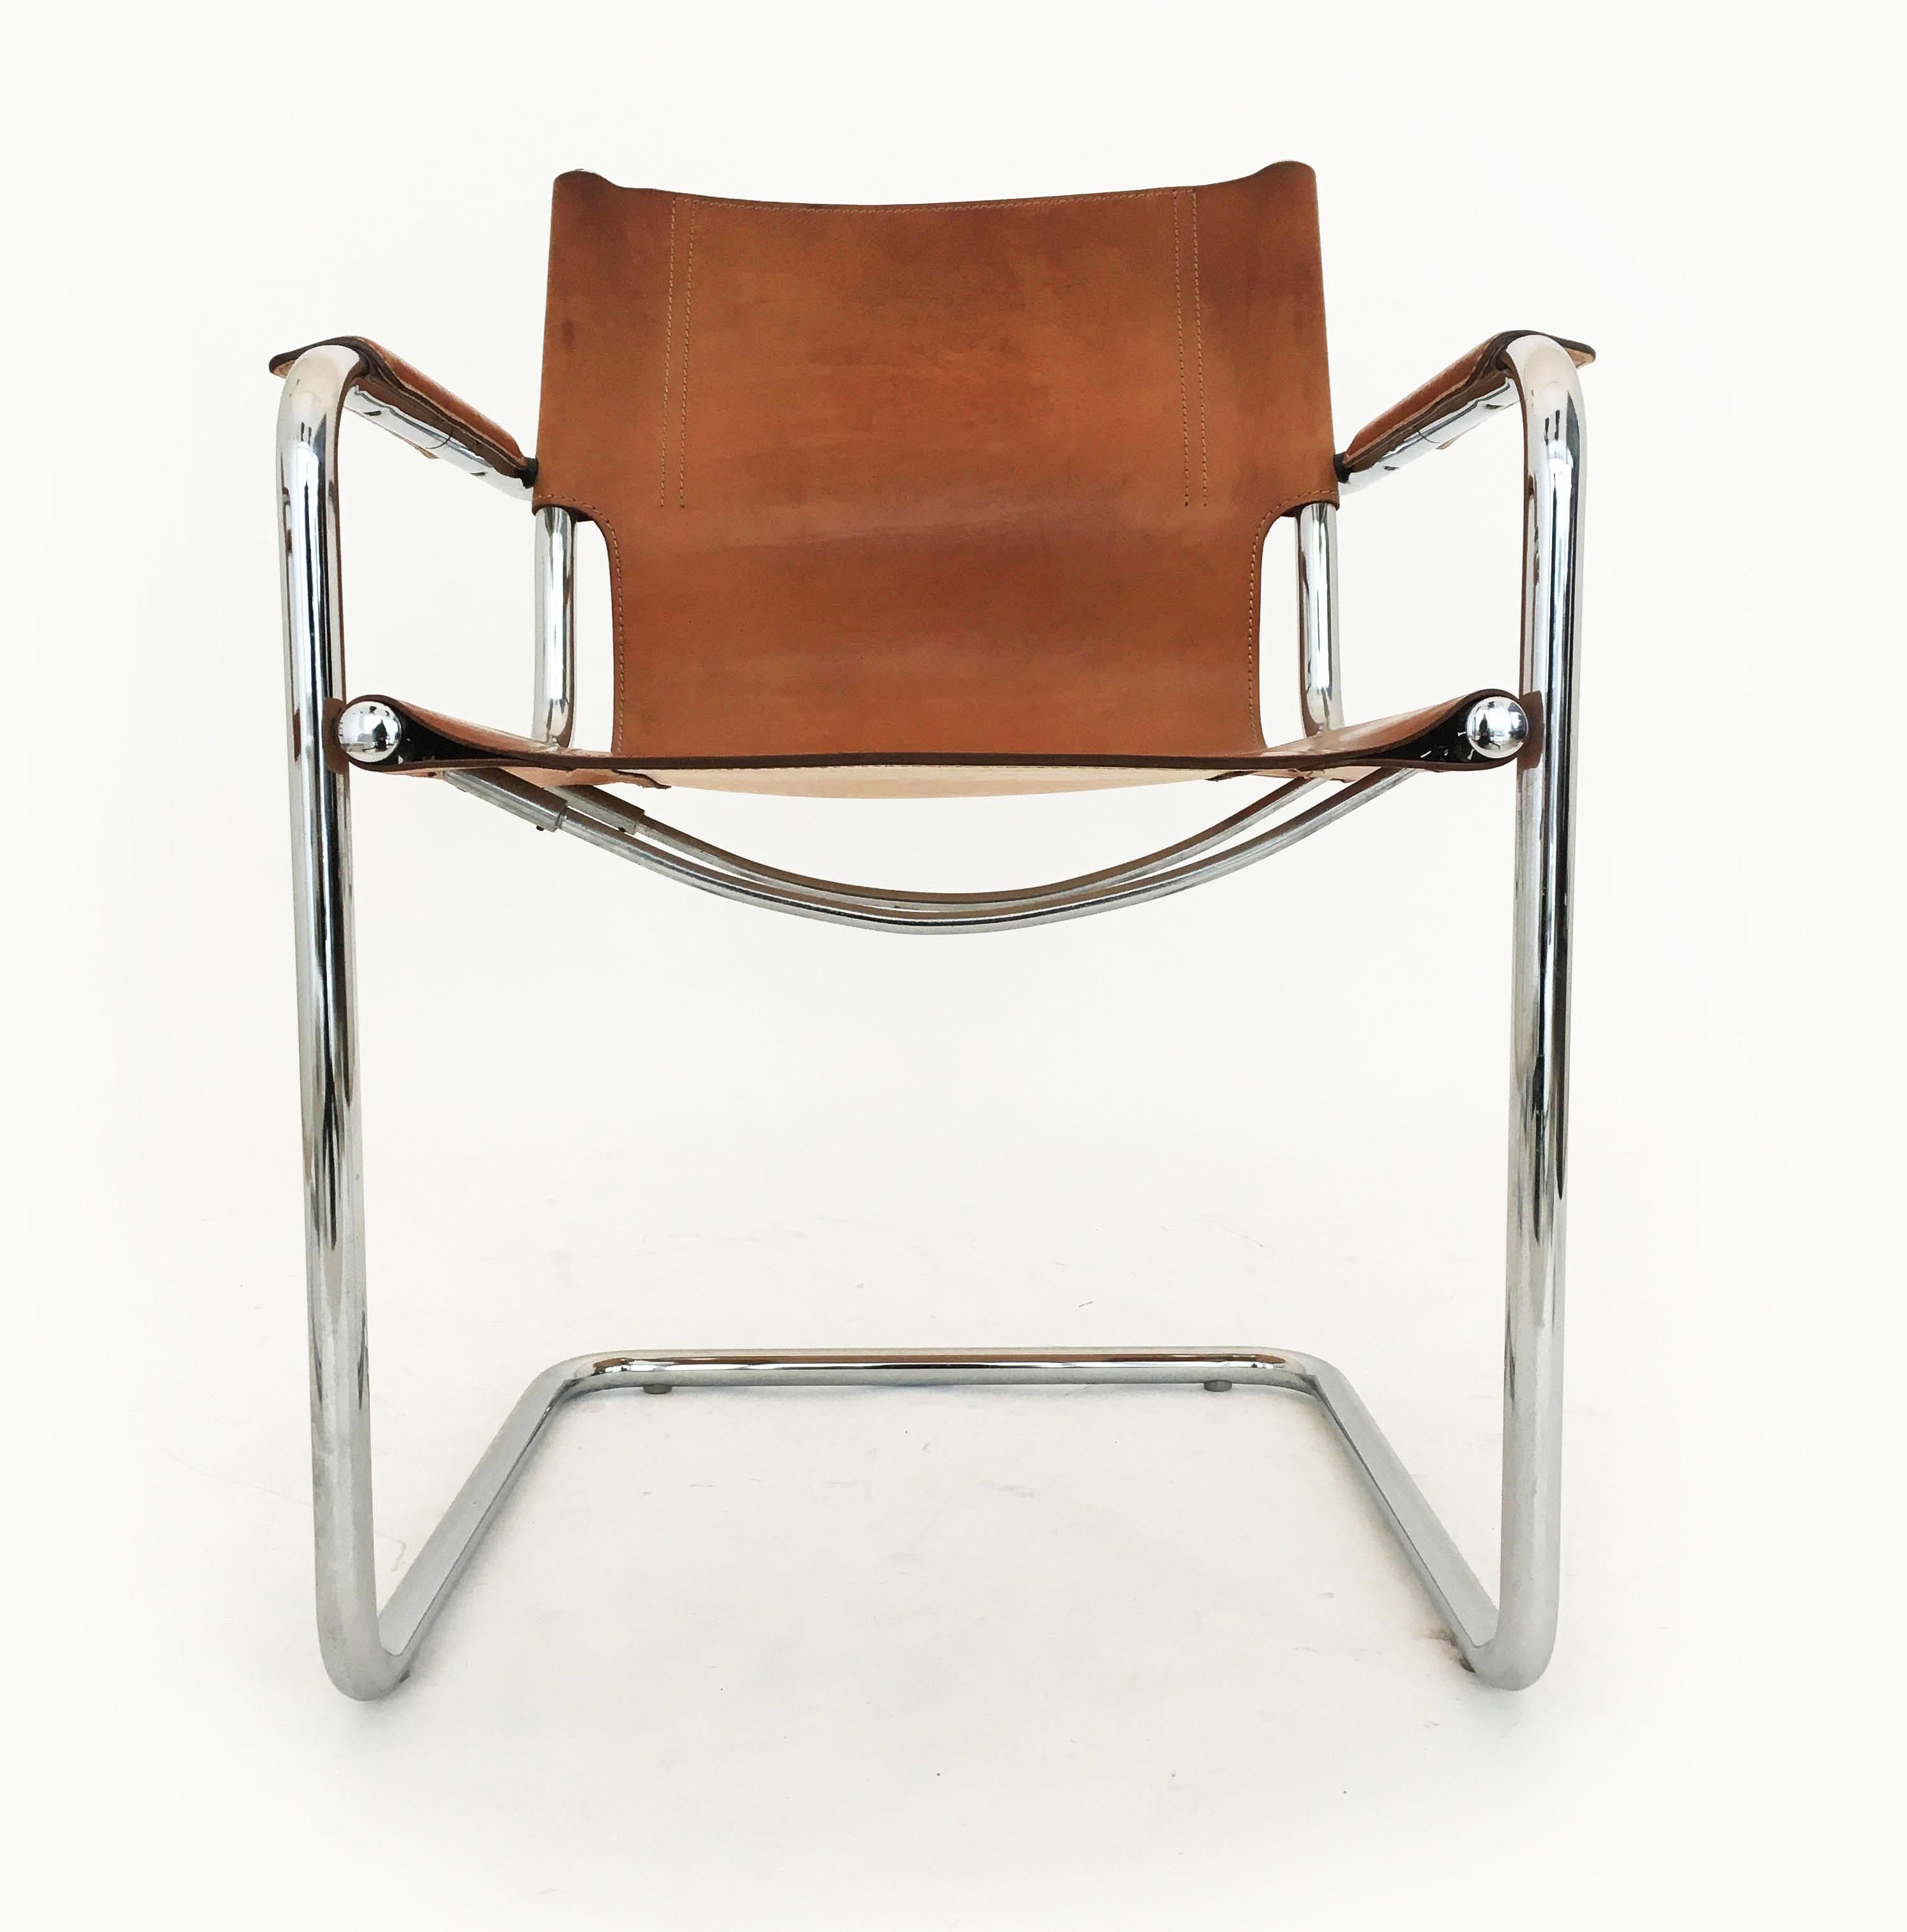 Italian Matteo Grassi Model 'Visitor' Chairs in Patinated Cognac Leather, Italy 1970s